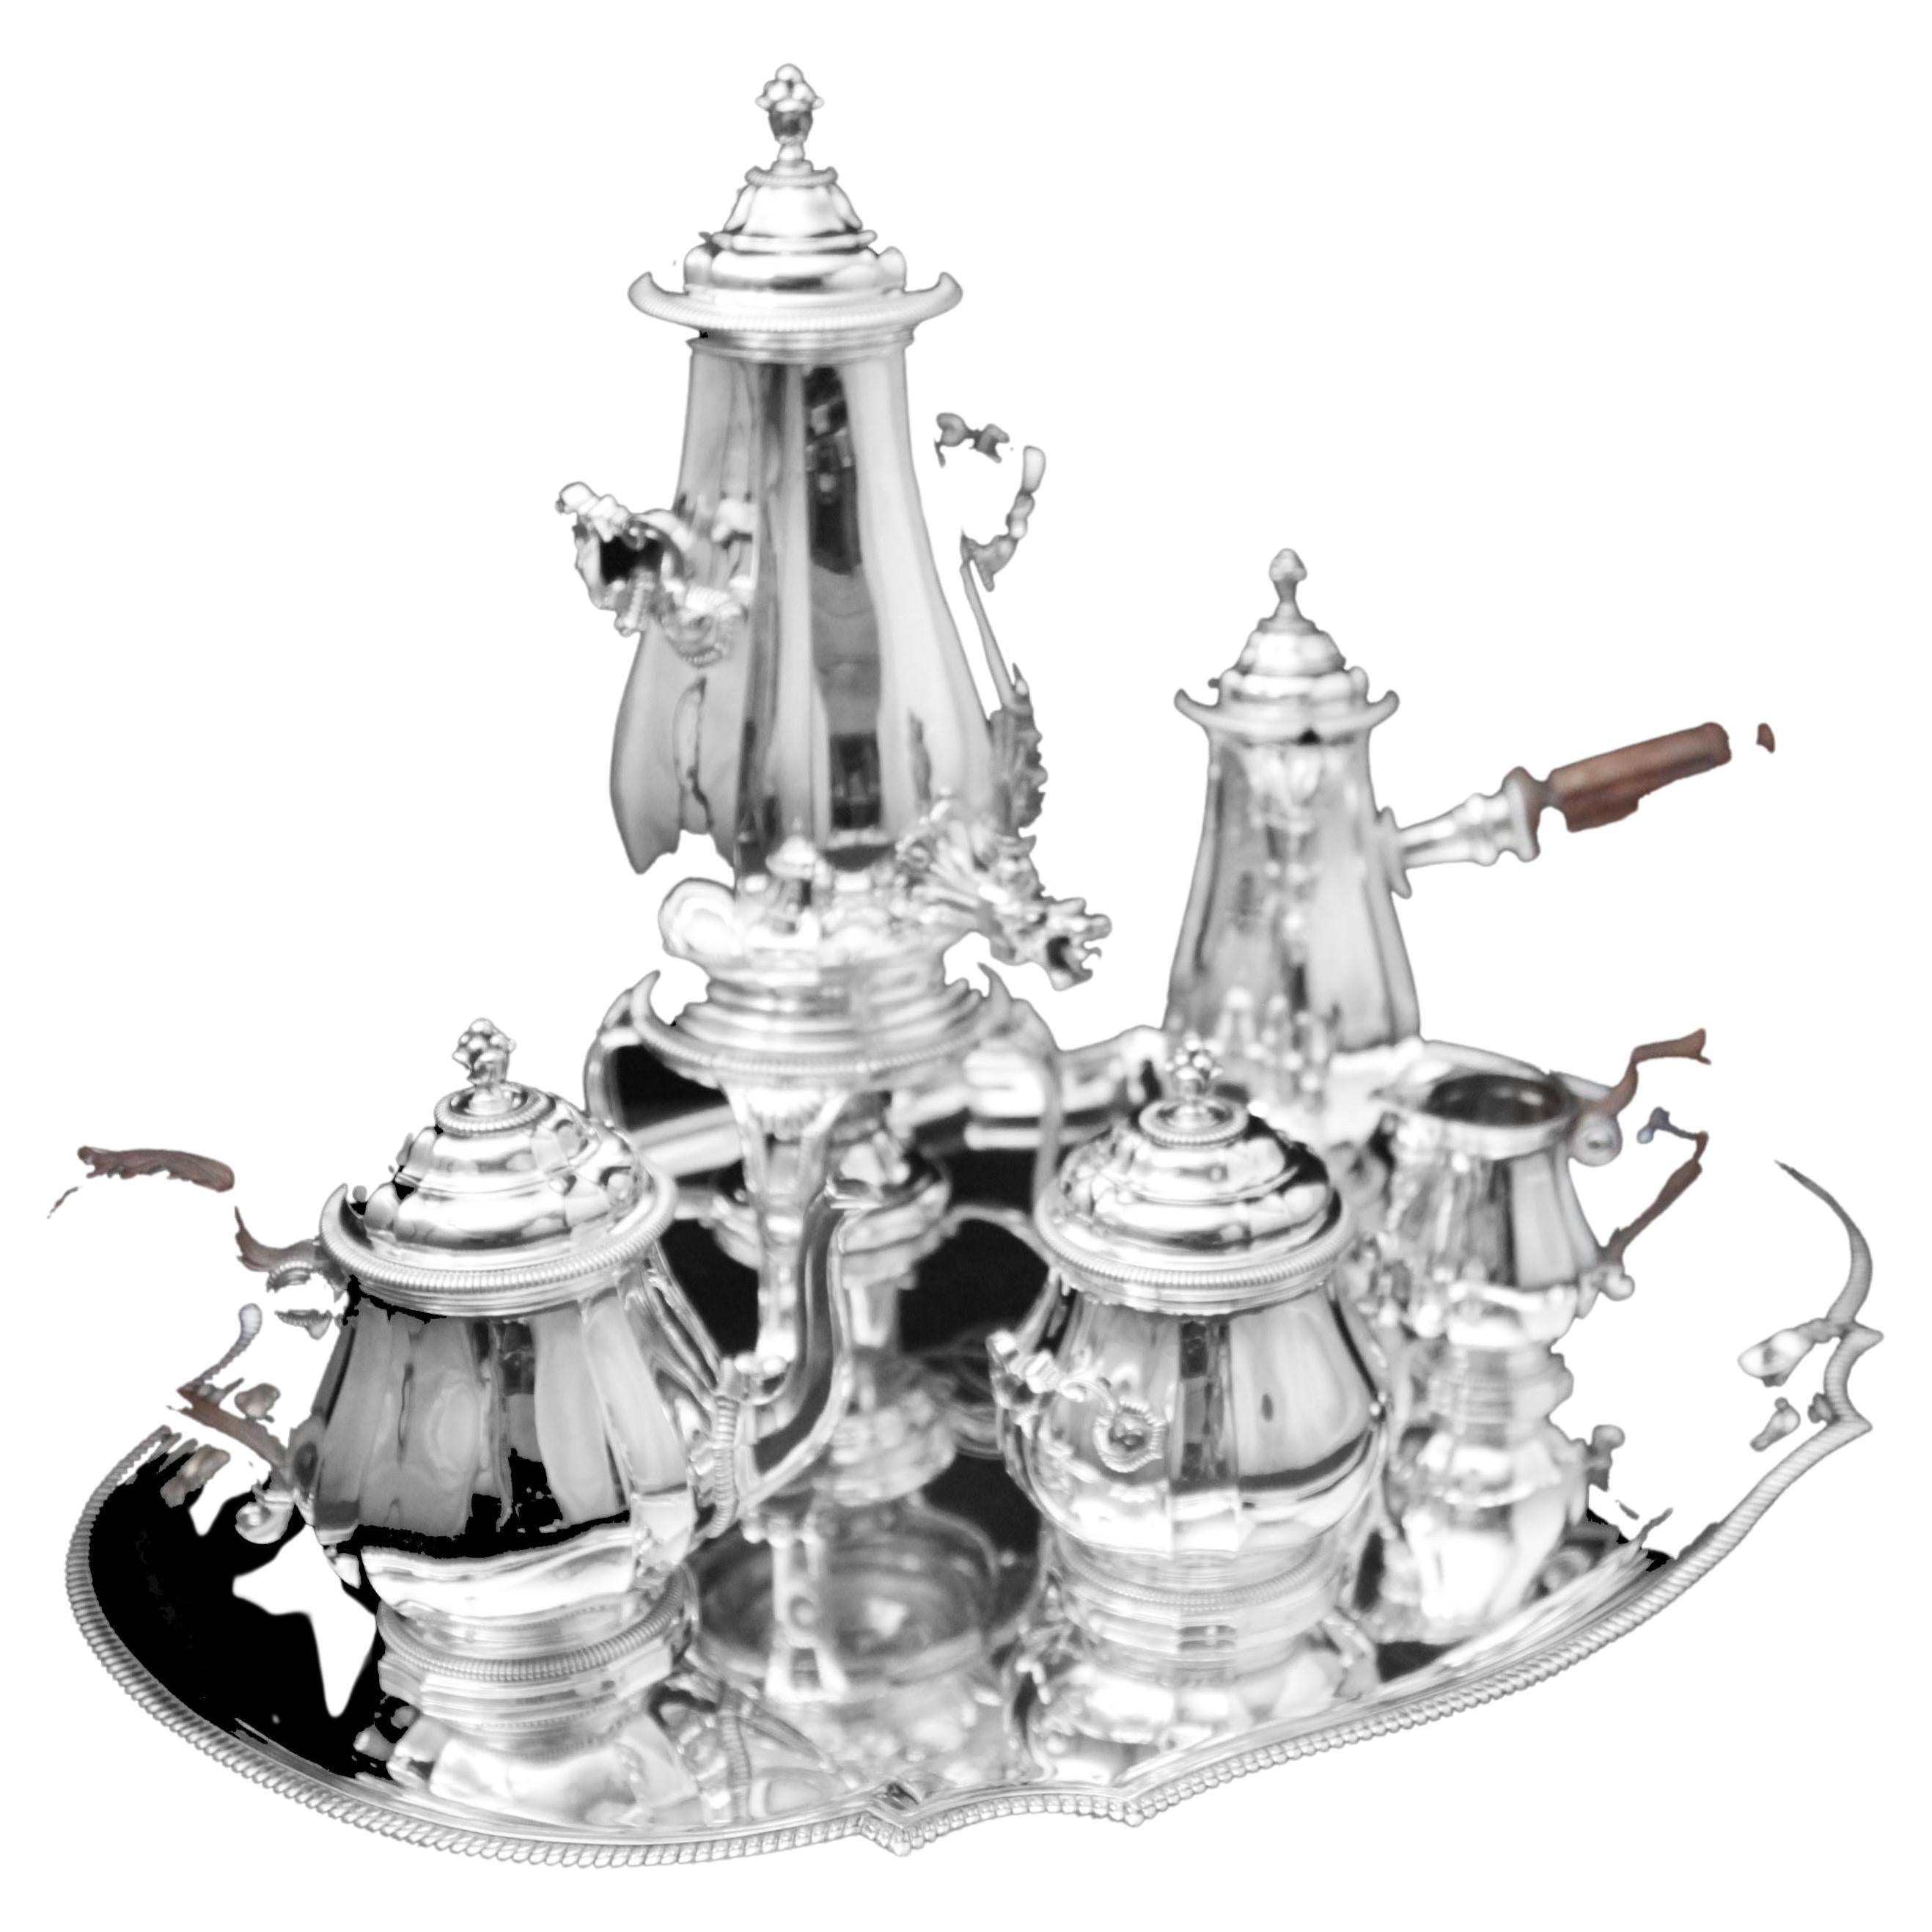 Boin-Taburet: 6pc. Antique French 950 Sterling Silver Tea Set - Like New! For Sale